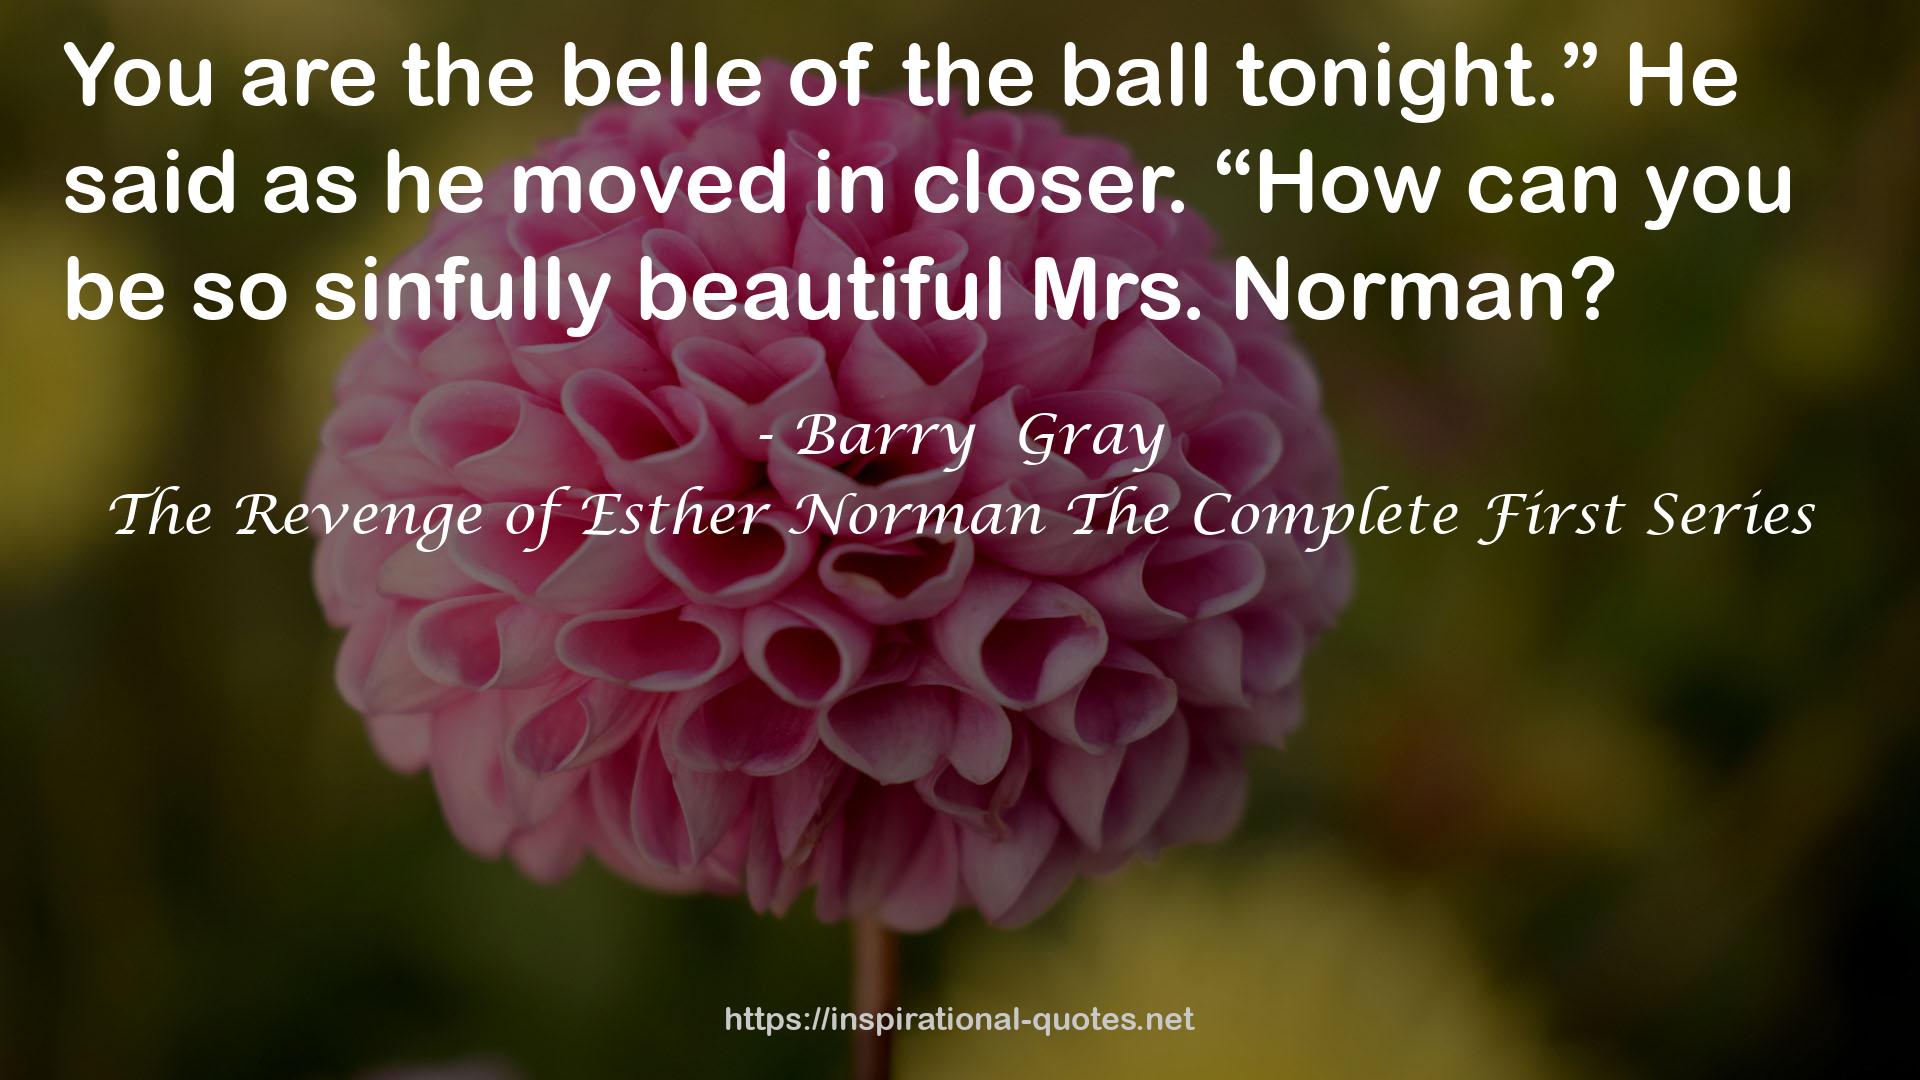 The Revenge of Esther Norman The Complete First Series QUOTES